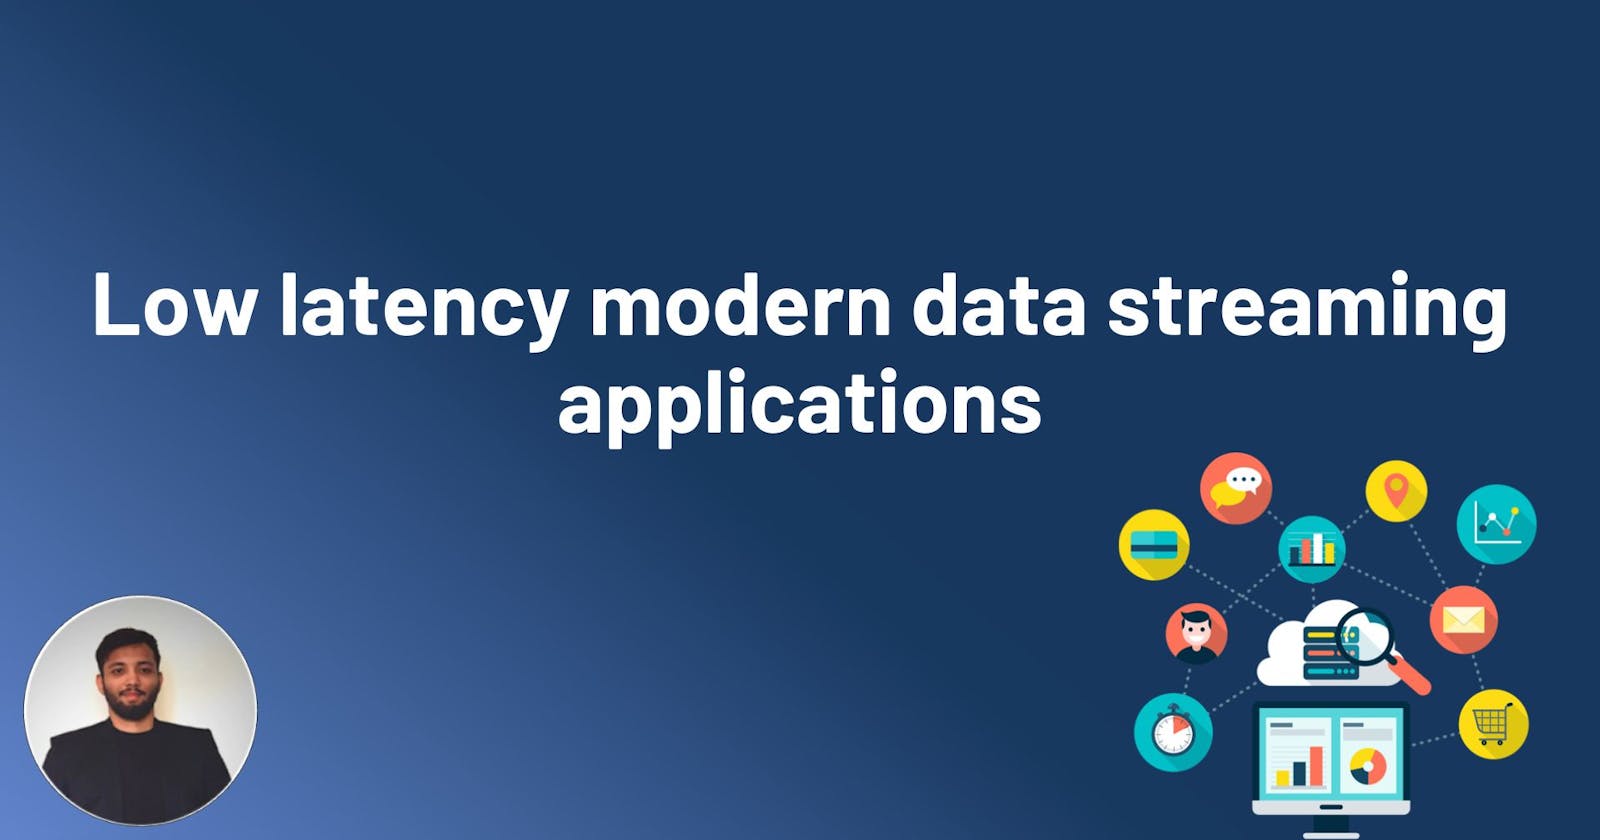 Low latency modern data streaming applications